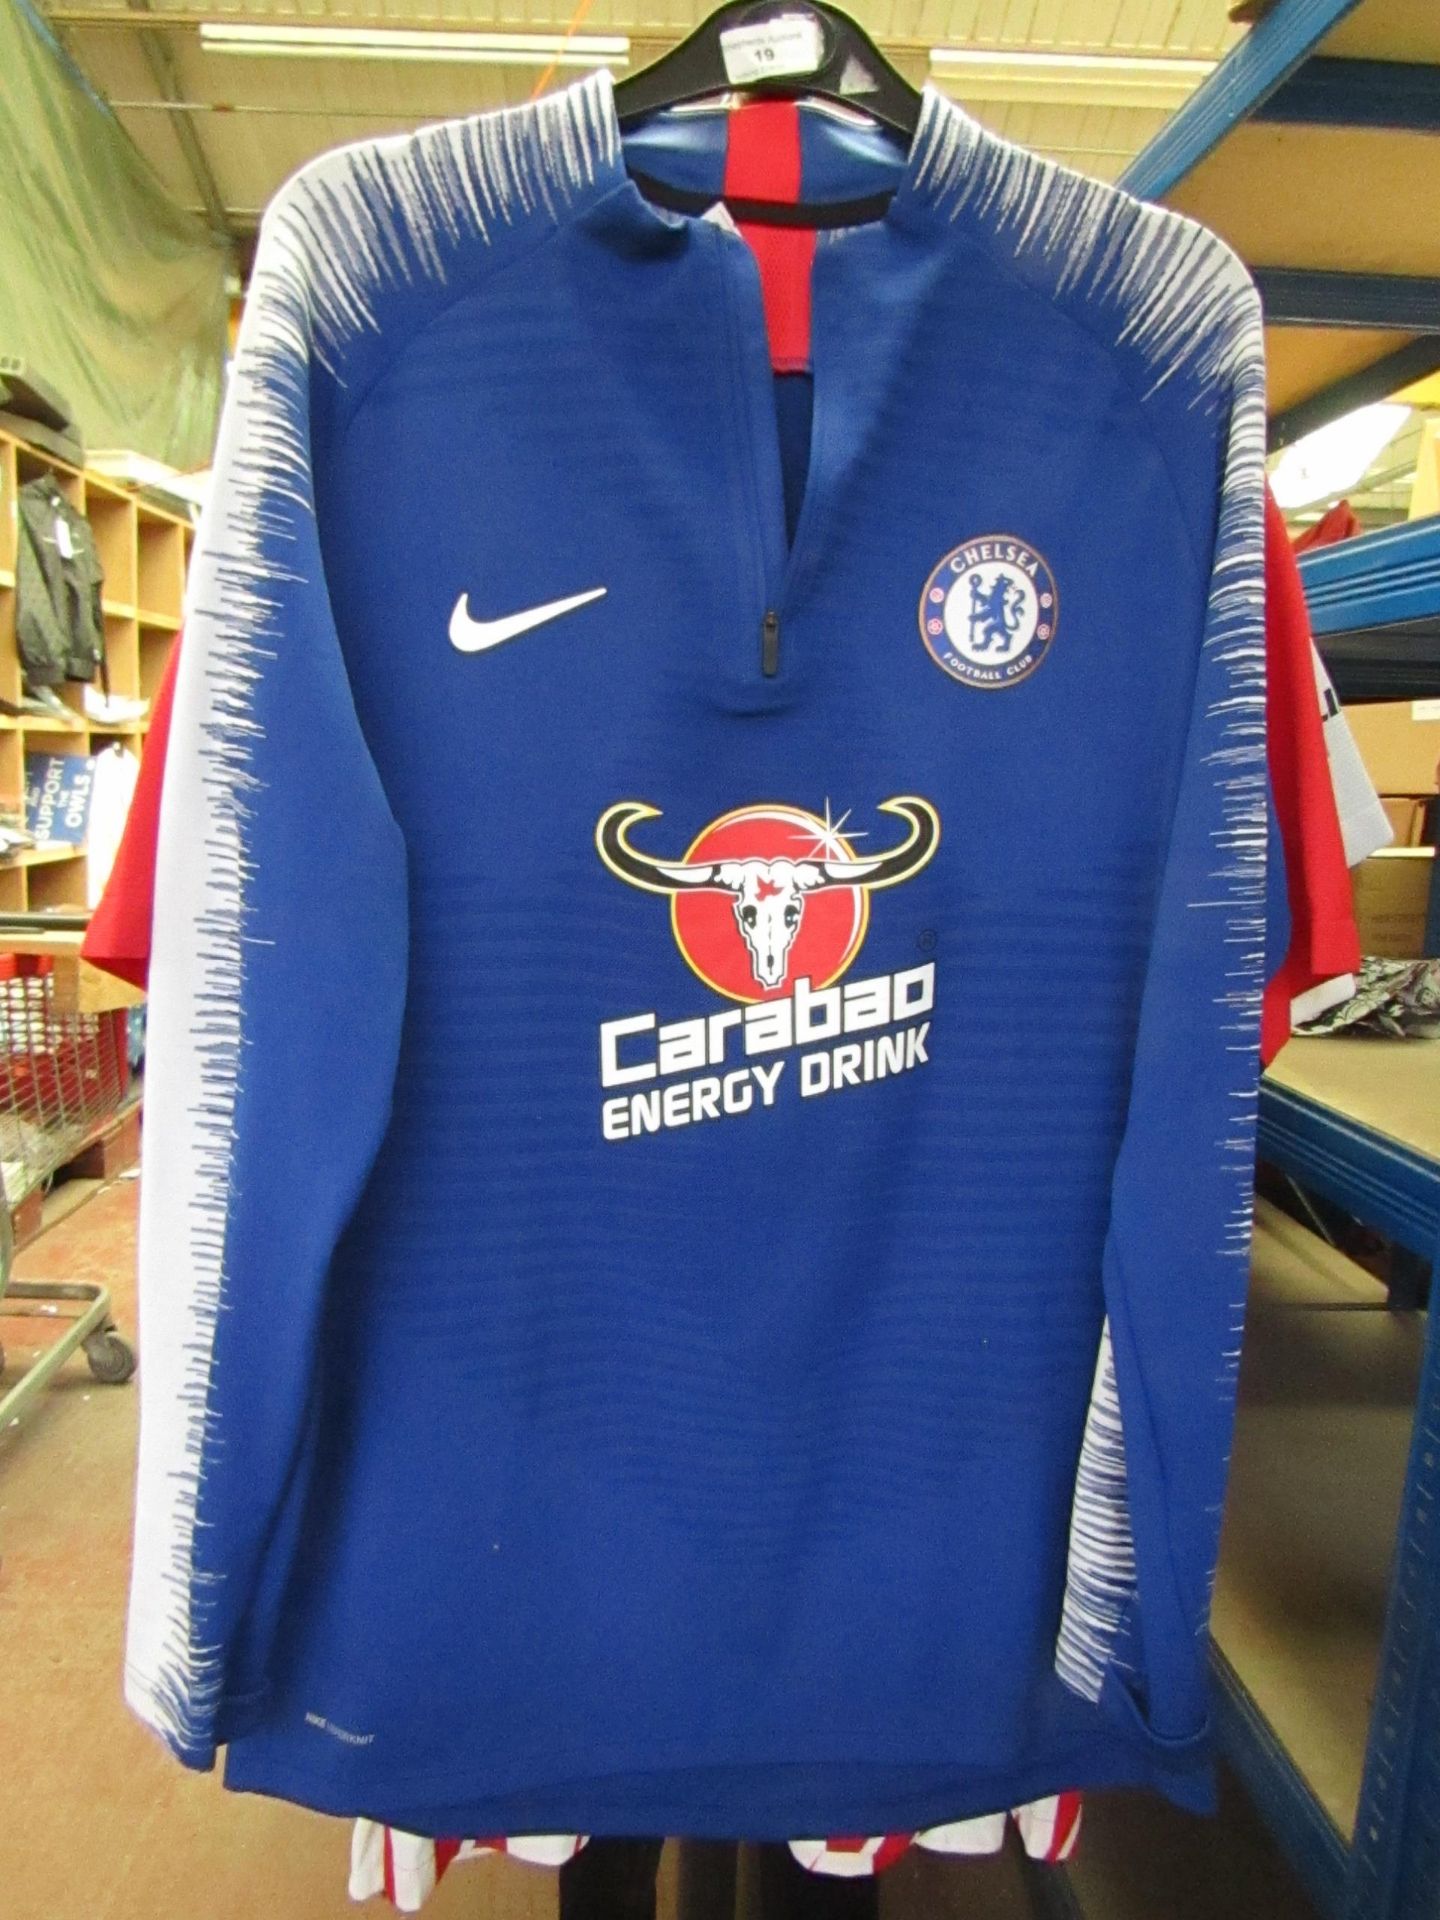 Chelsea Official Nike Training Top size L see image